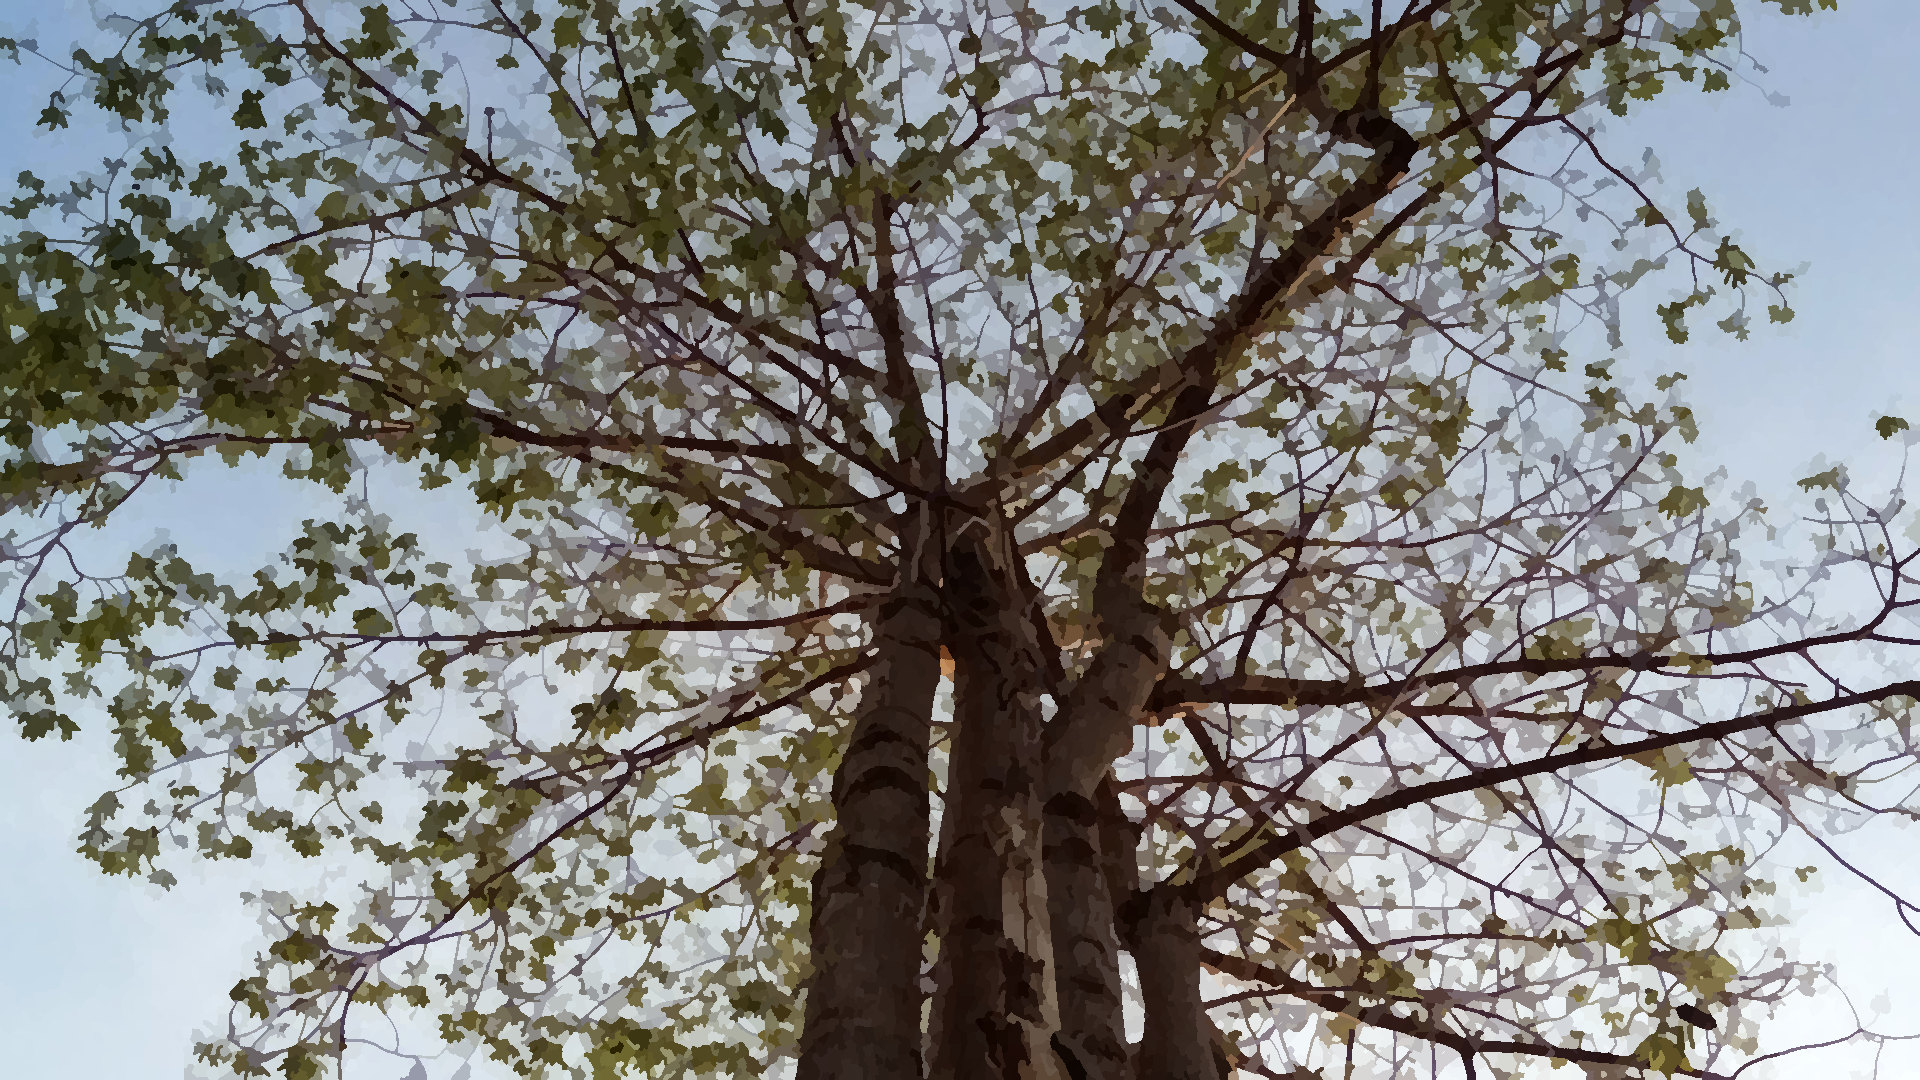 The former leafless tree, now full of leaves